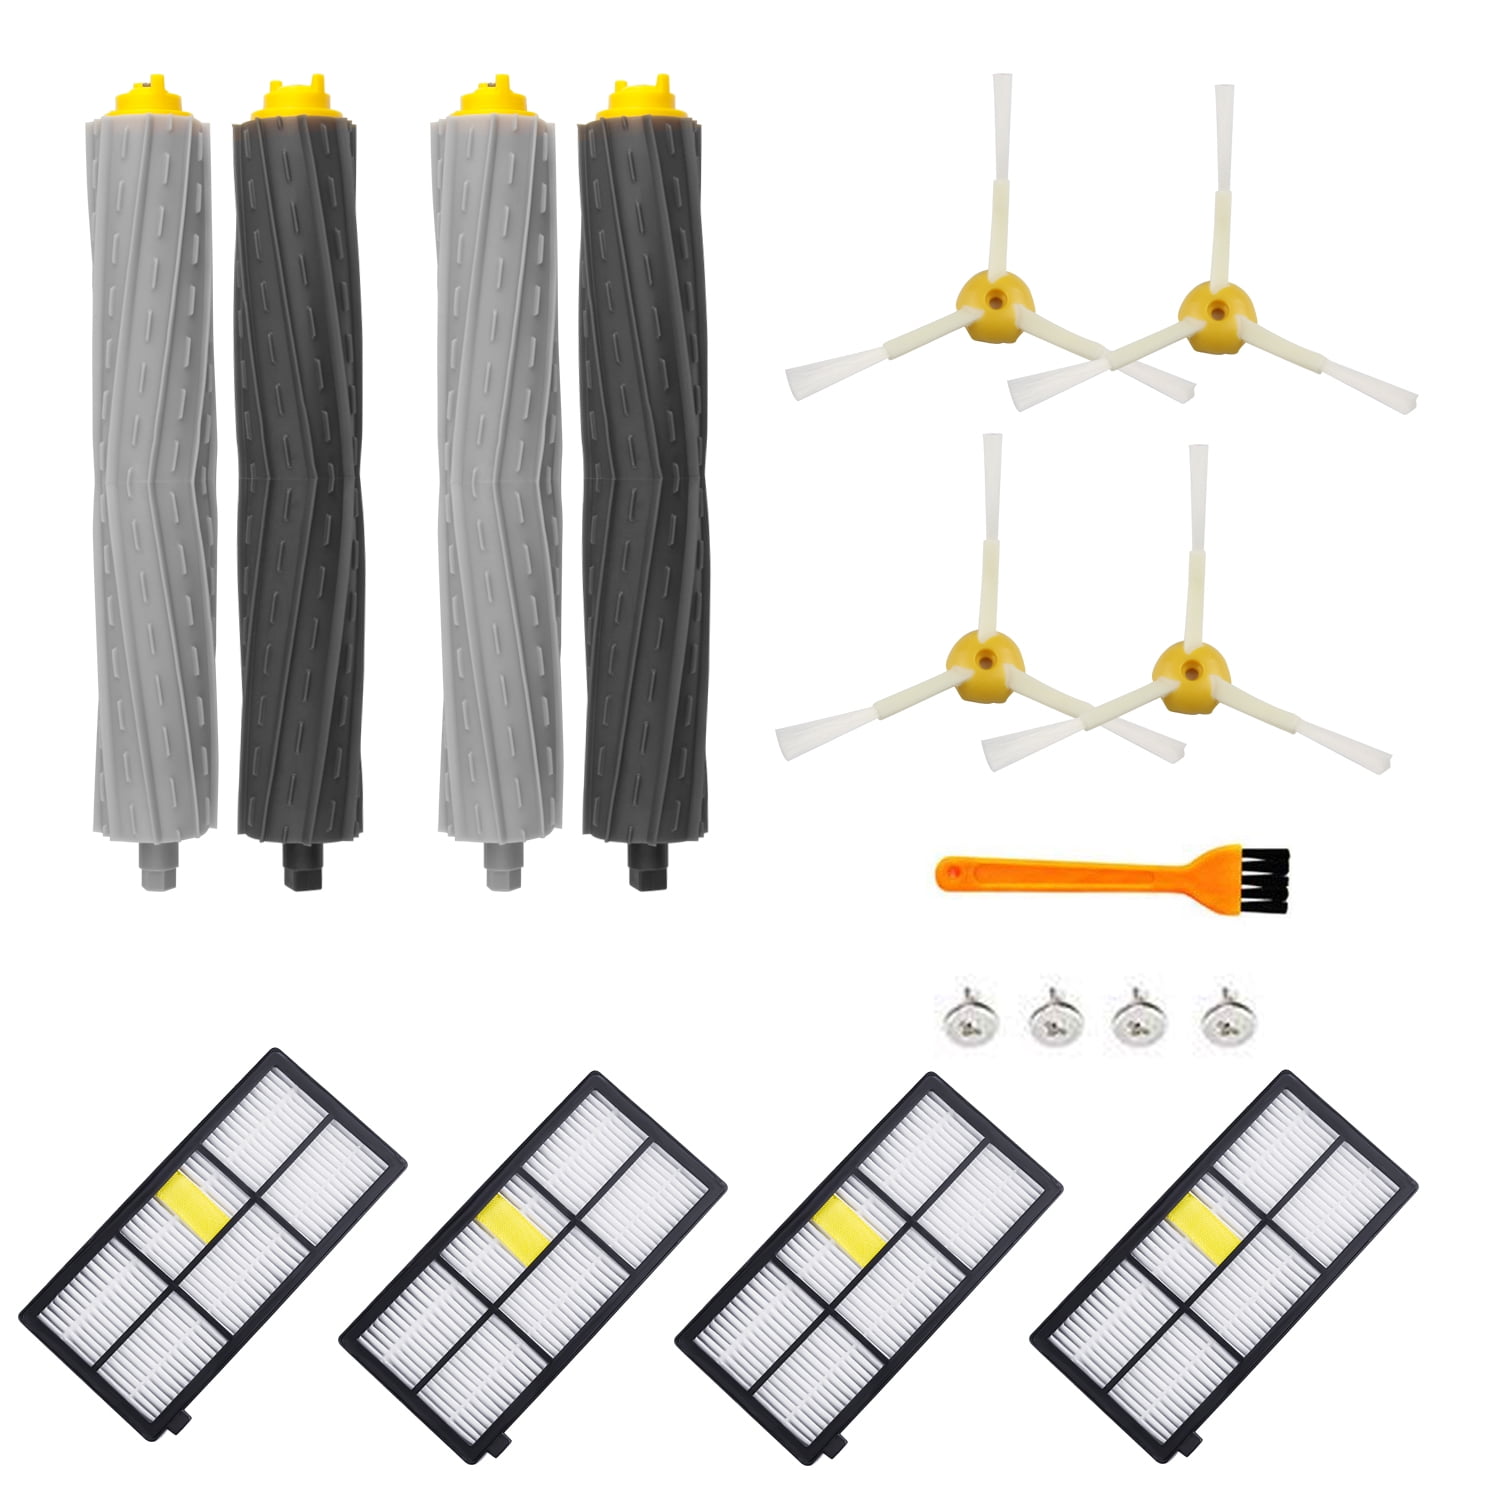 DLD Replacement Parts for Roomba 800 900 Series 805 860 870 871 880 890 960  980 Vacuum Accessories KitsIncludes Debris ExtractorSide BrushScrews and  Filters Replenishement Kits (12pcs price in UAE,  UAE